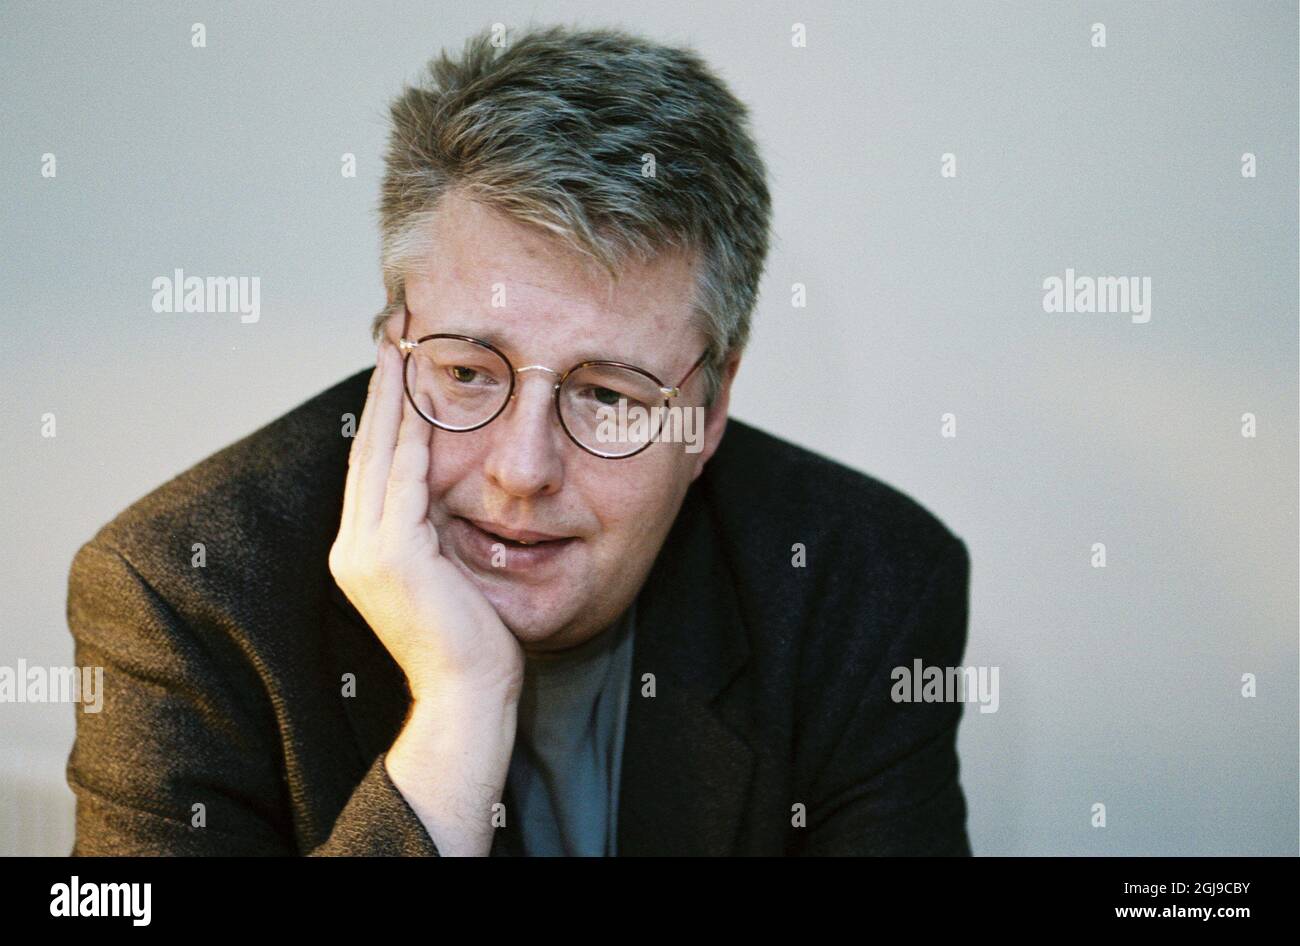 *File picture in connection with the release of the new Millennium book August 27* STOCKHOLM 2004-11-02 Swedish journalist and author Stieg Larsson. Stieg Larsson died from a heart attack in 2004, 50 years old. His three thrillers that were unpublished when he died, 'Men who hate women', 2005 , 'The girl who played with fire', 2006 and 'The air castle that blew up', 2007 are all bestsellers in Sweden and in several other countries. Photo: Britt-Marie Trensmar / SCANPIX code 36710  Stock Photo